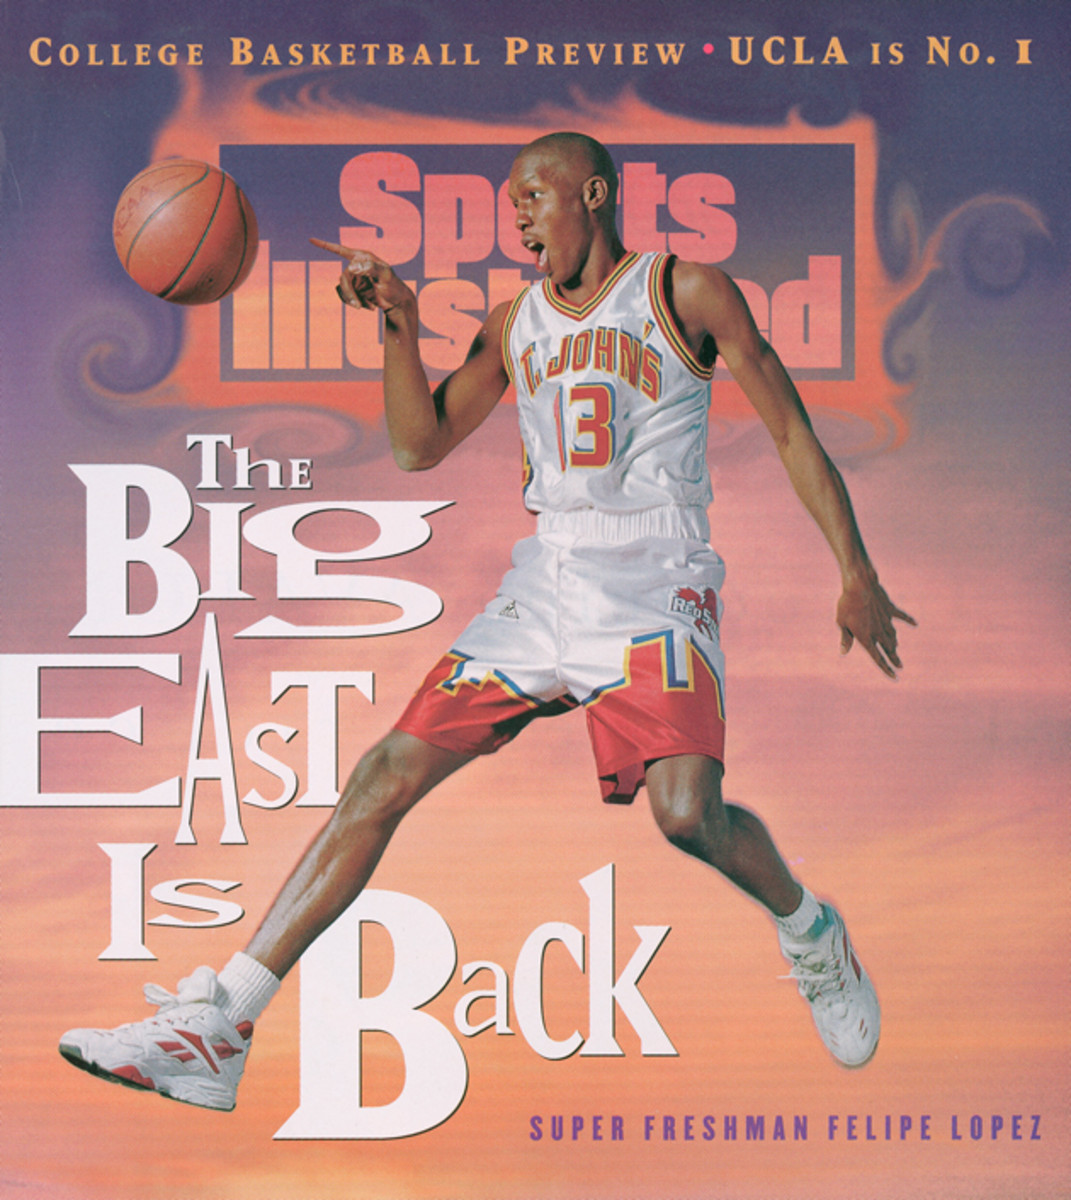 Felipe Lopez dons the cover of Sports Illustrated for the November 28, 1994 issue.